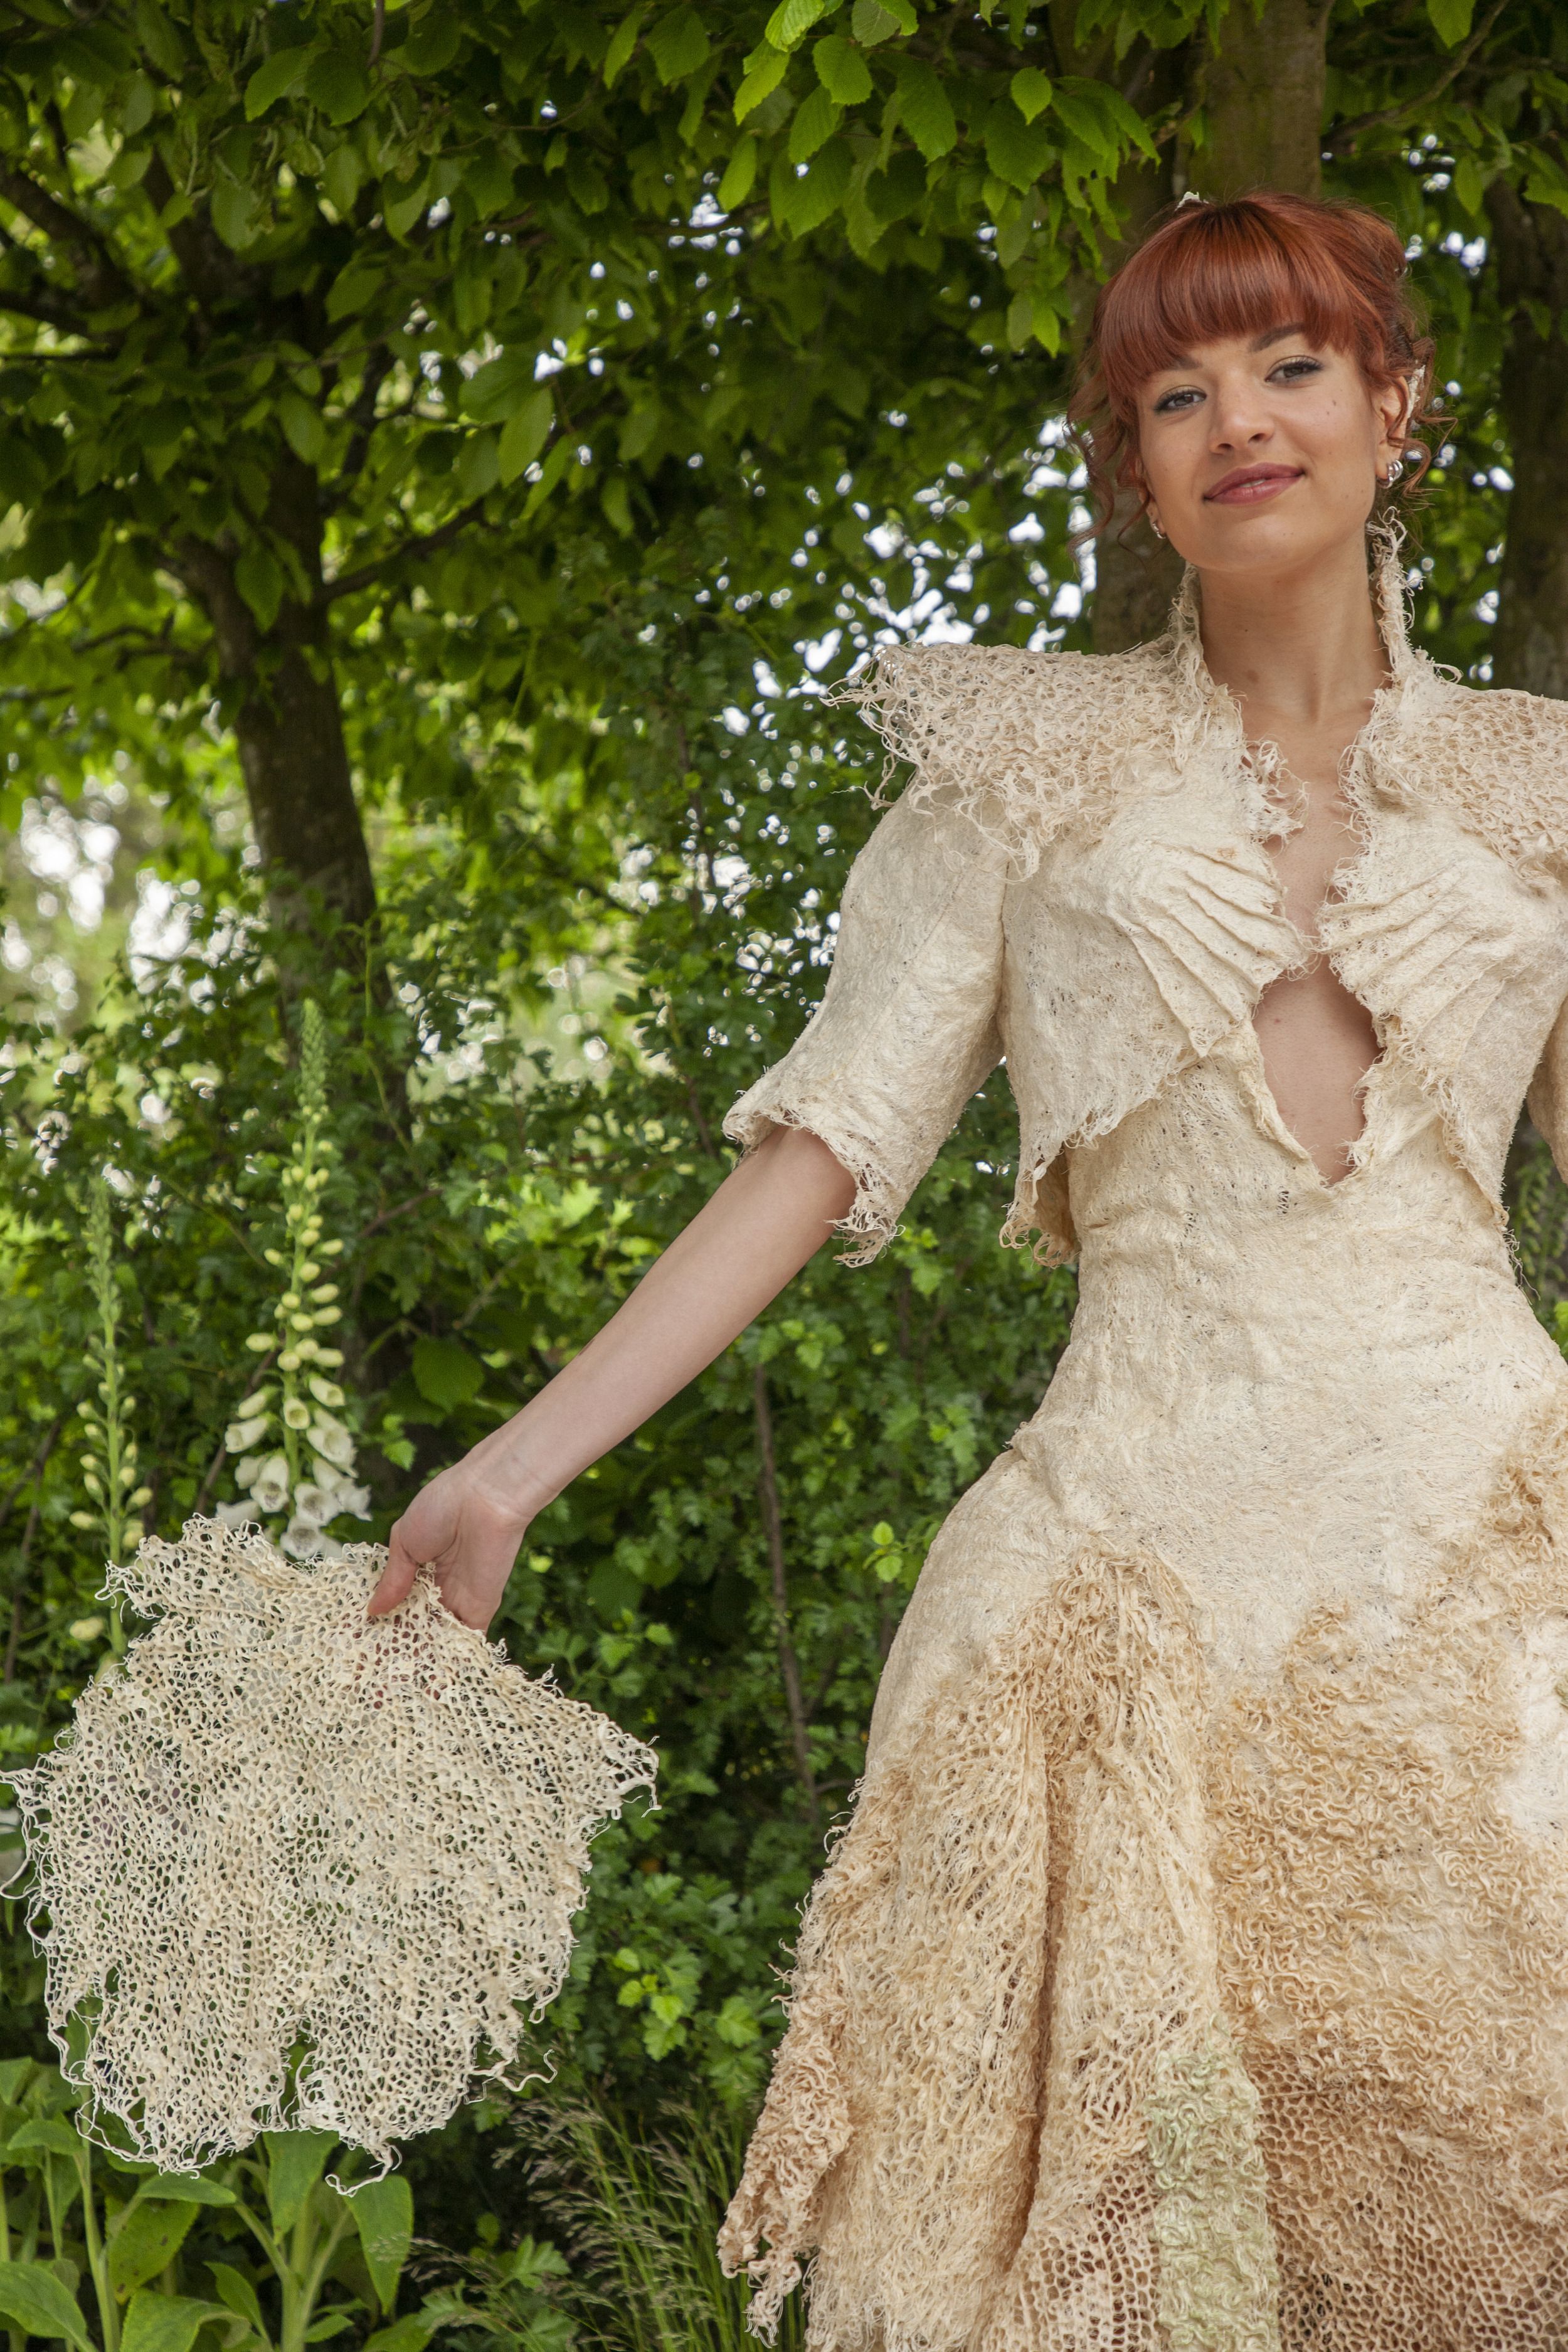 Eco-conscious biodegradable wedding dress at Chelsea Flower Show